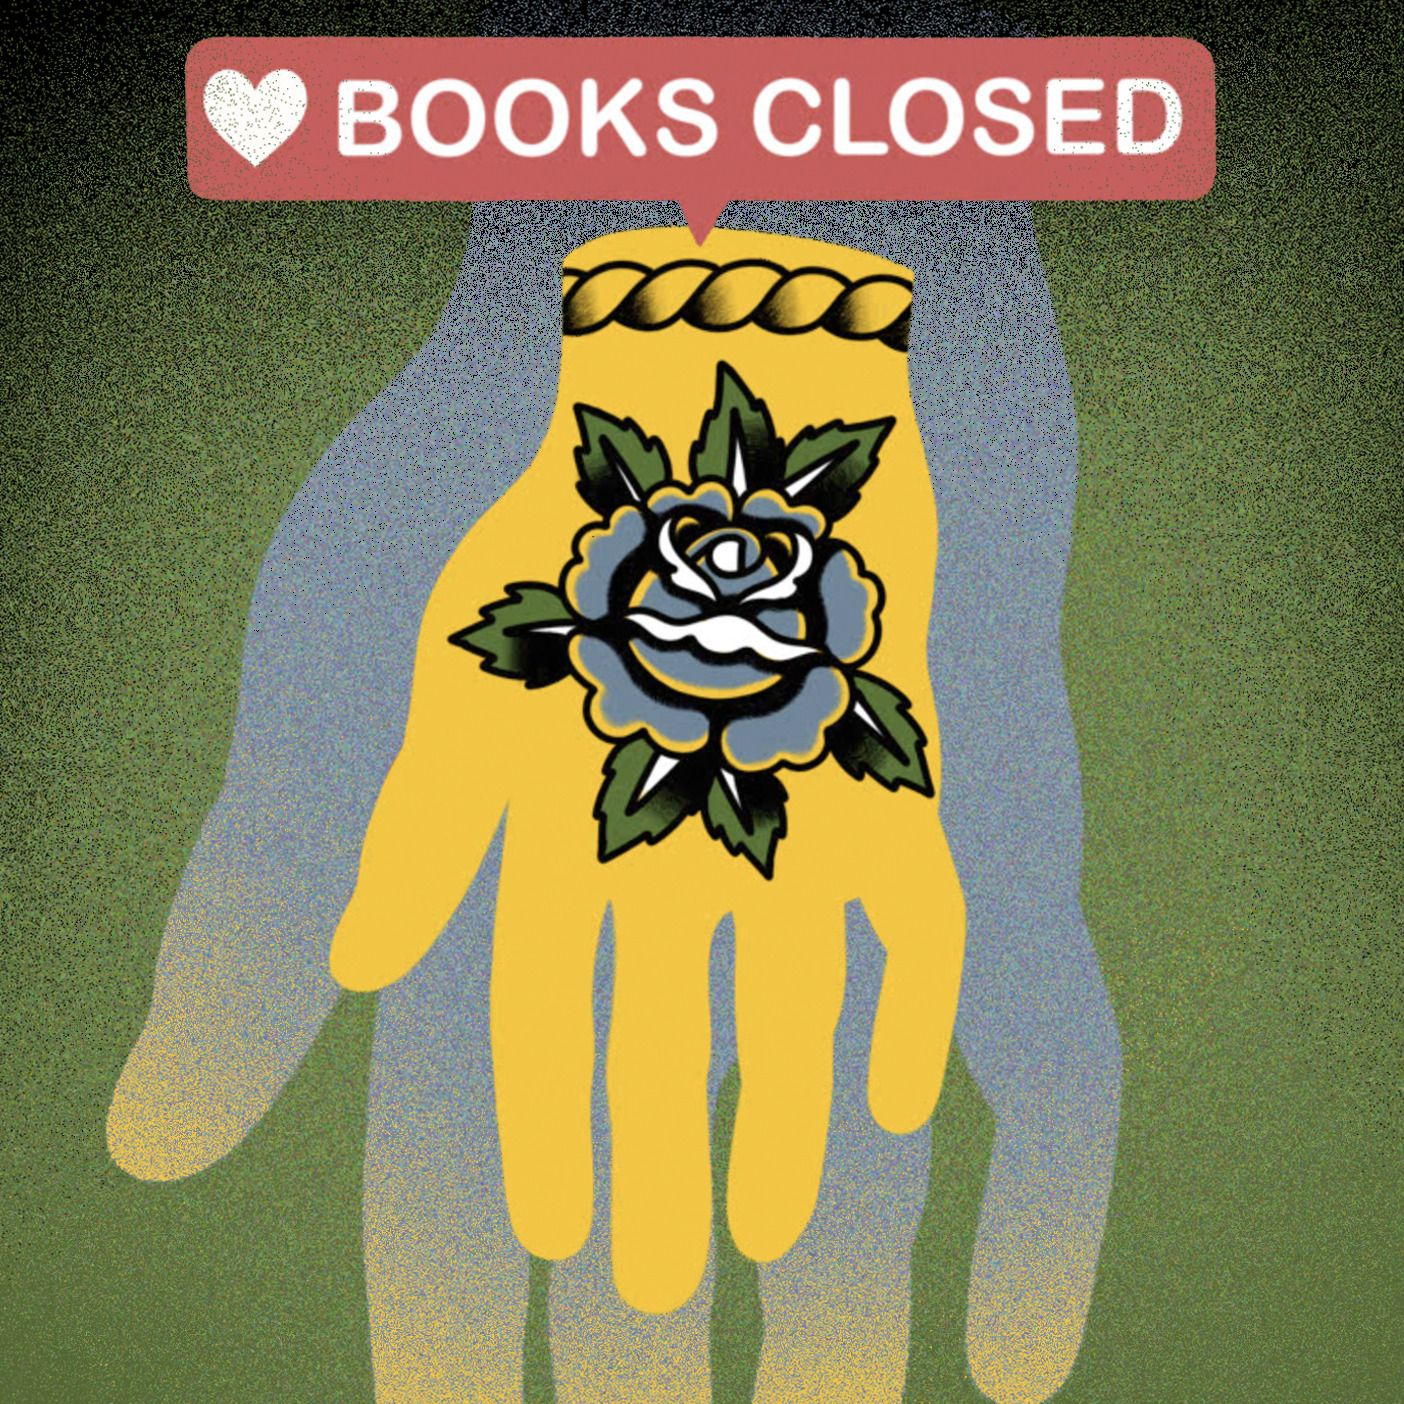 Books Closed: Tattoos and the Internet Collide, Hosted by Andrew Stortz